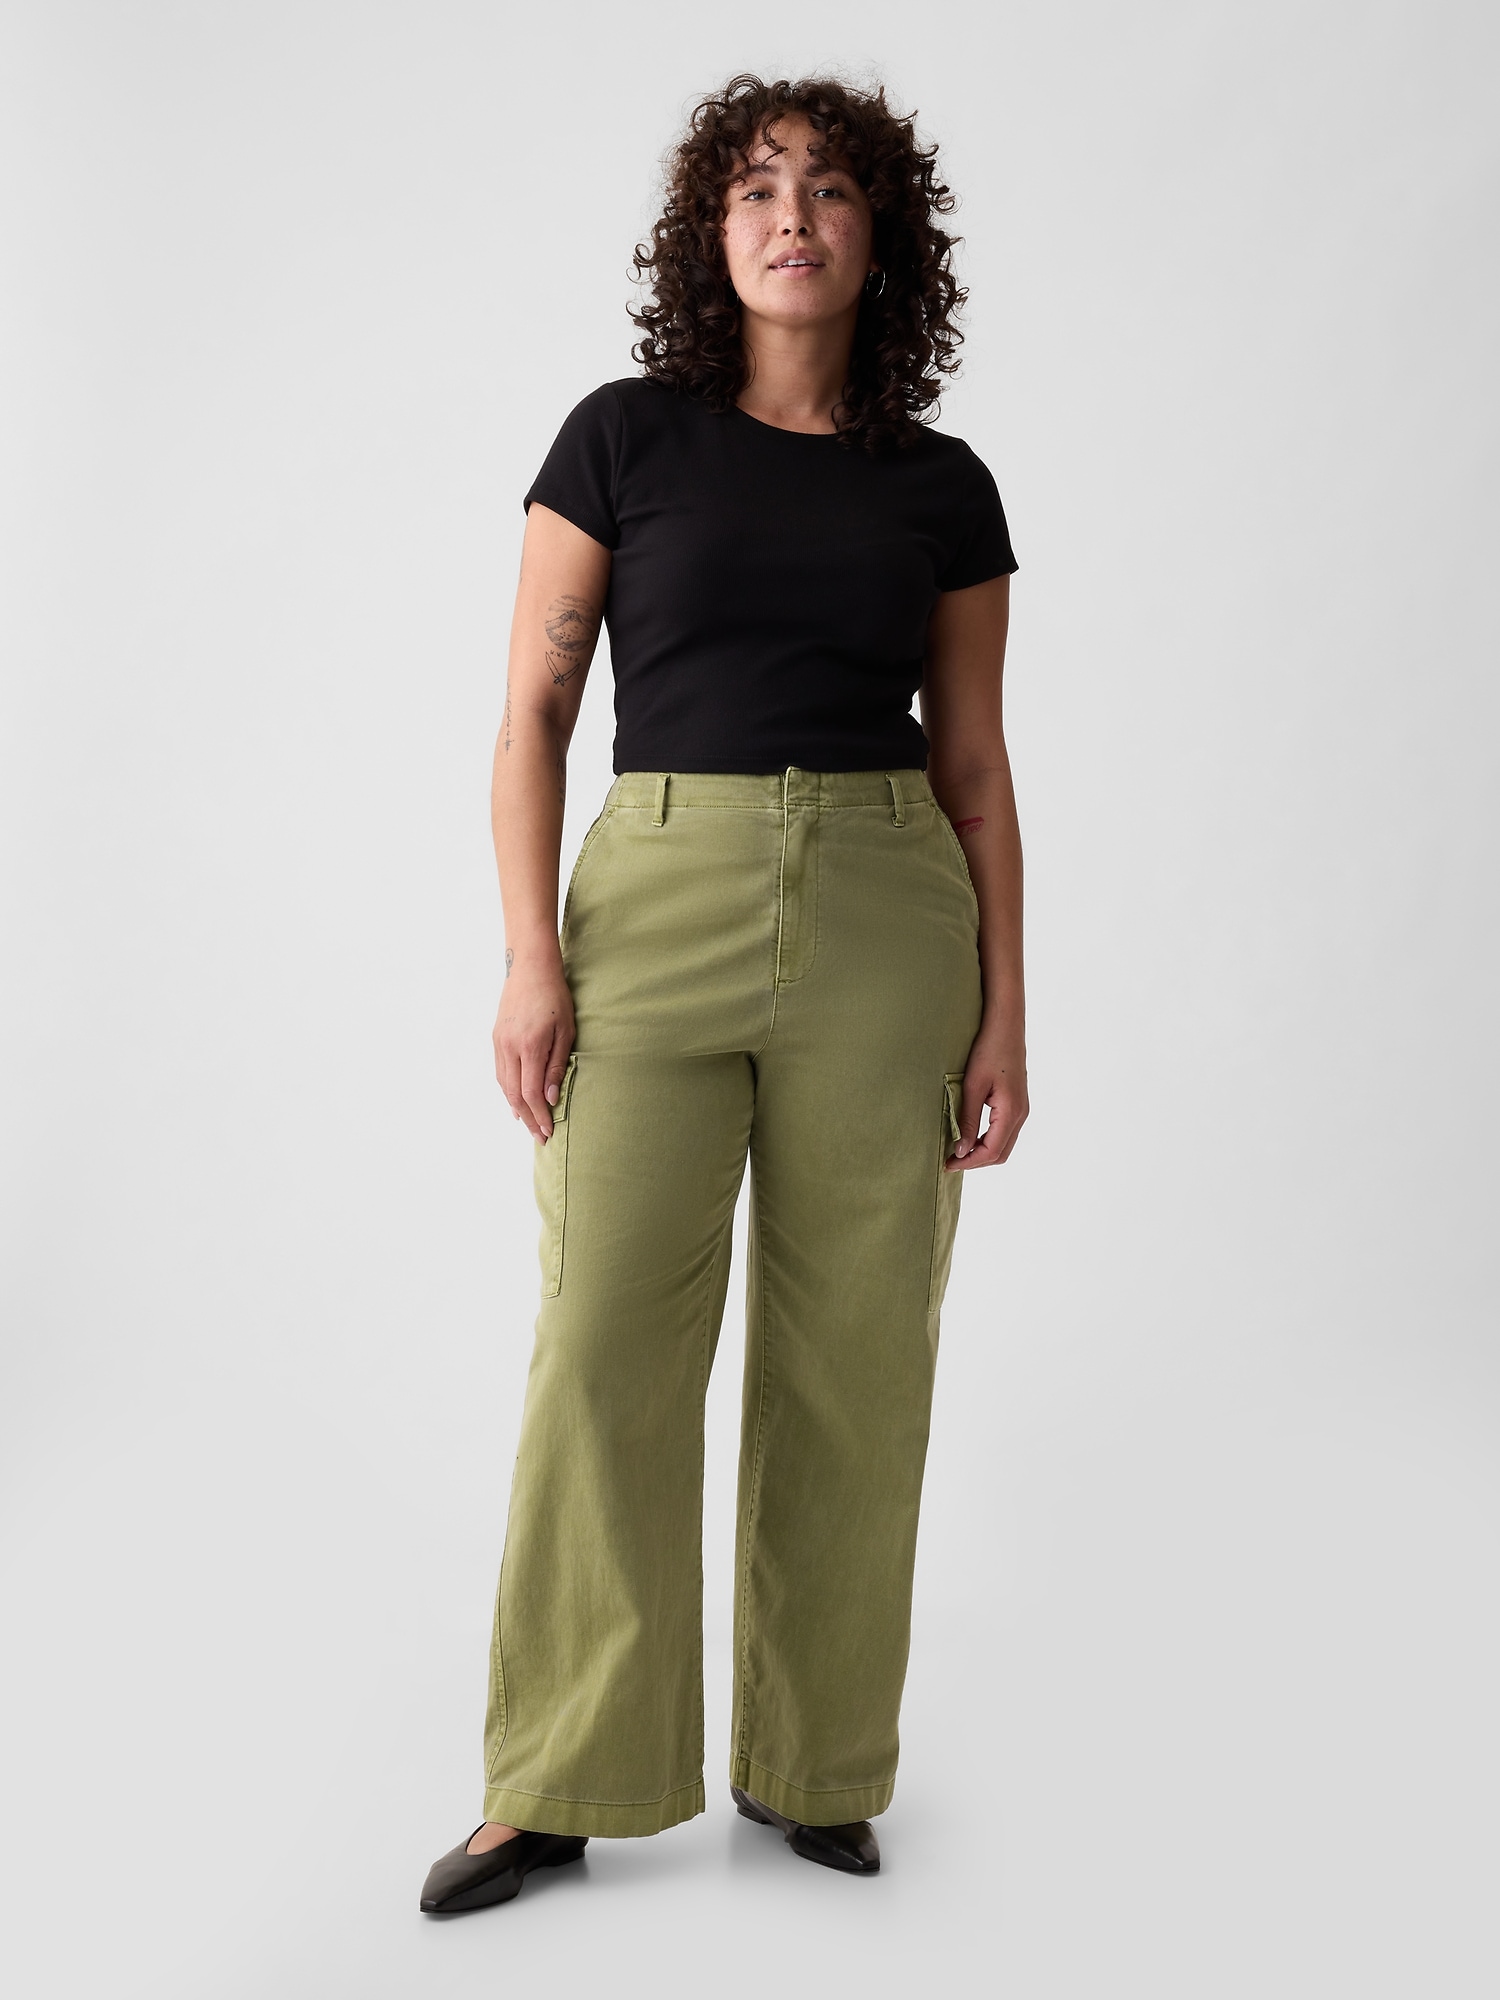 Time Tru Pant S 4 6 Pull On Mid Rise Cuffed Crop Khaki Casual